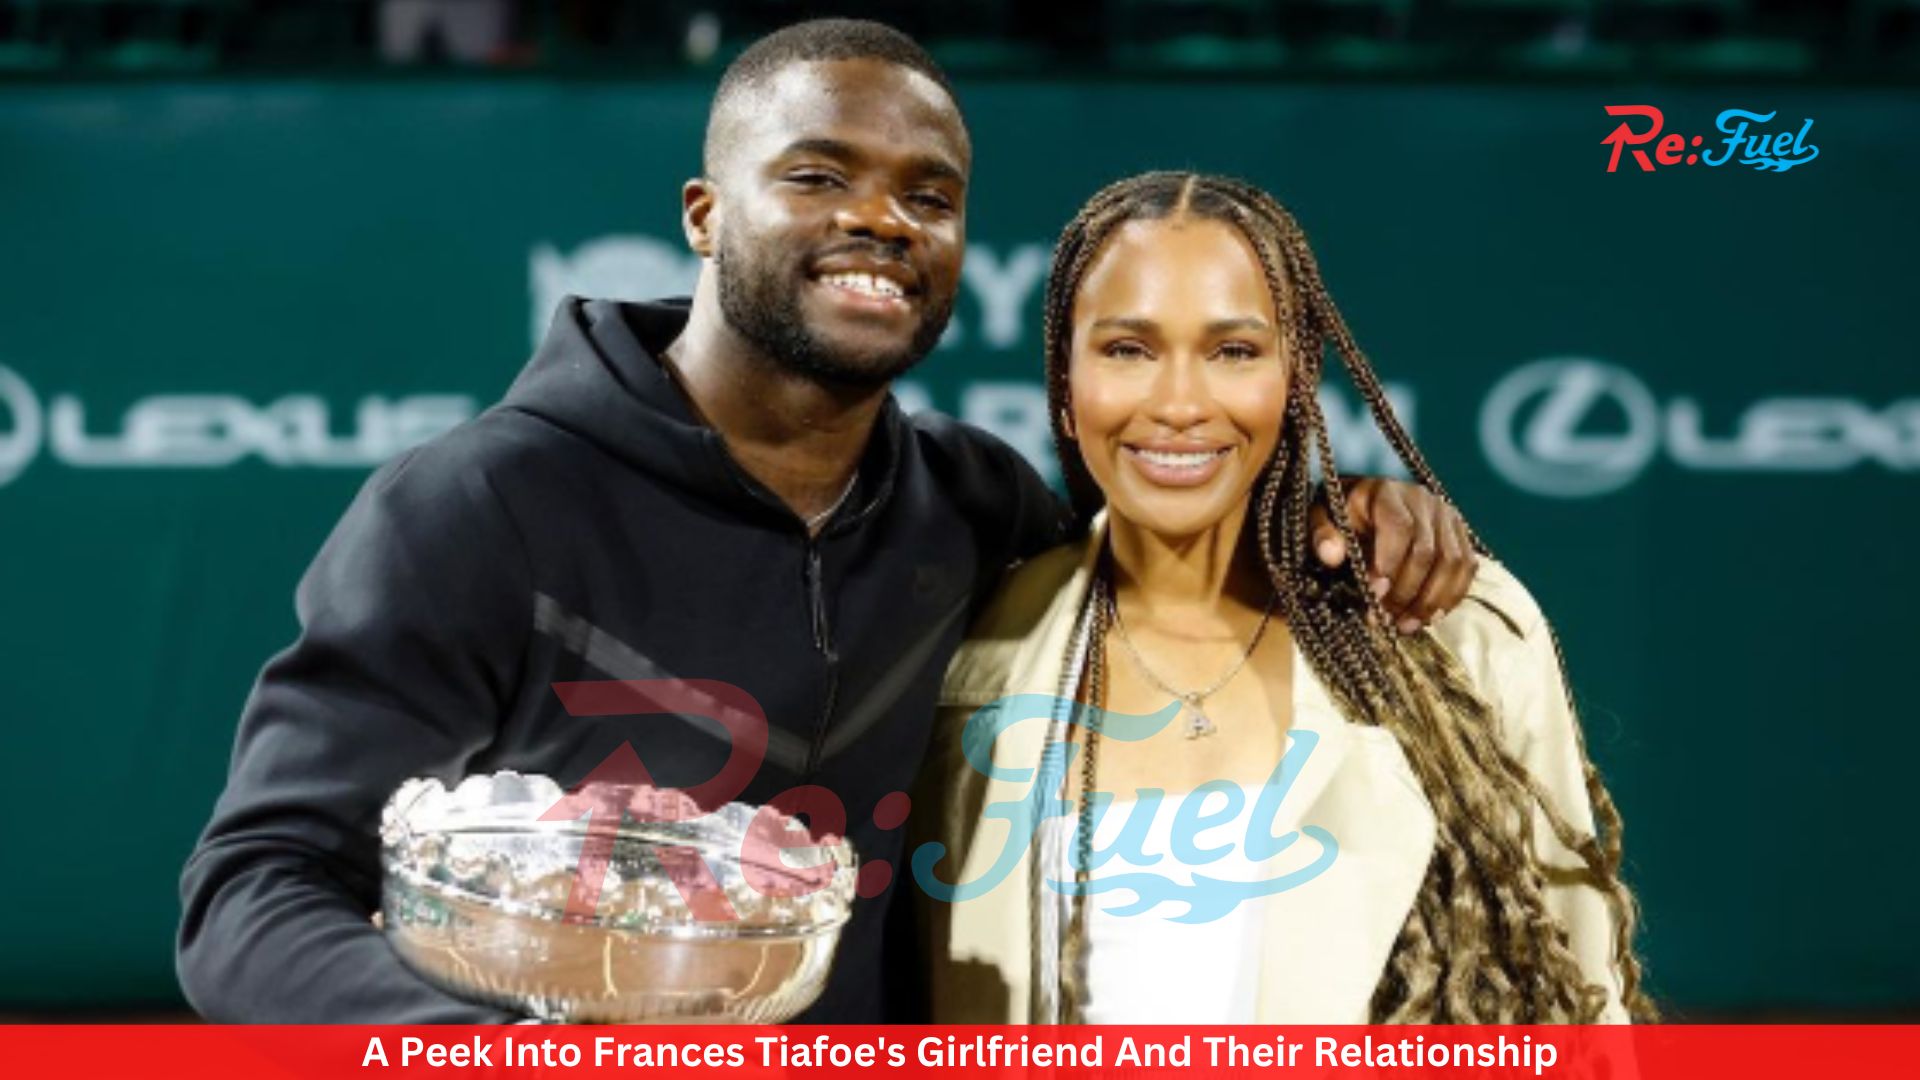 A Peek Into Frances Tiafoe's Girlfriend And Their Relationship